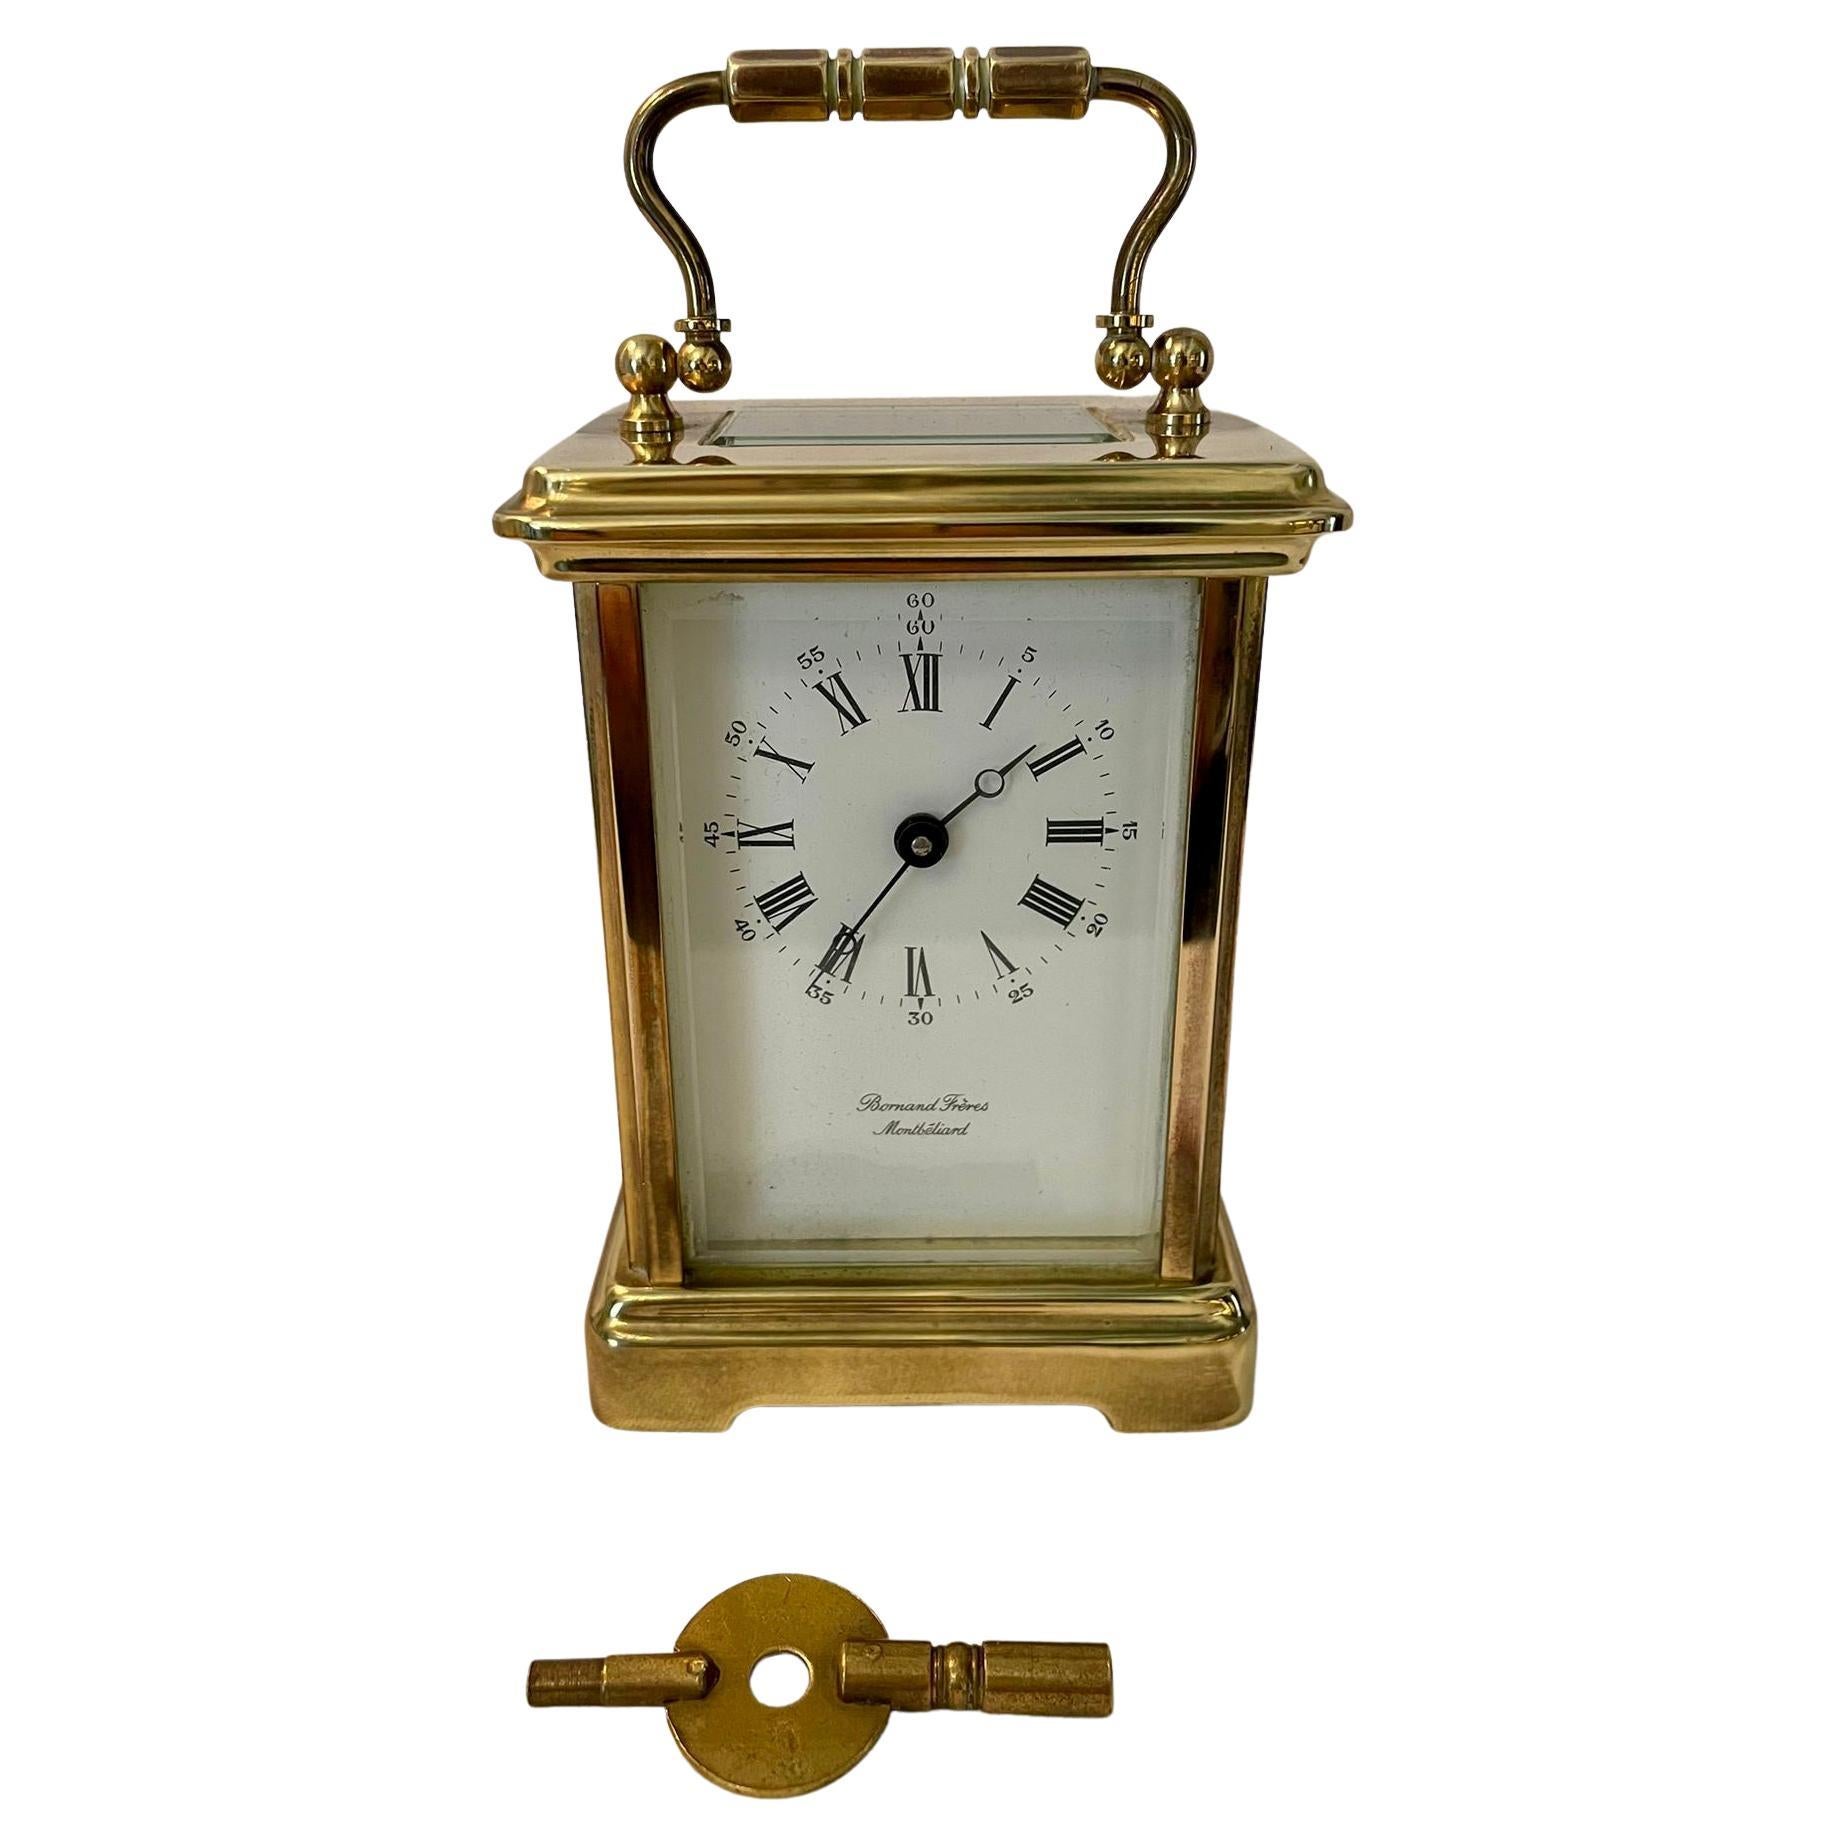 Antique Edwardian French brass carriage clock having a quality brass and bevelled glass case, enamel dial with original hands and an eight day French movement.

In perfect working order.

15 x 8 x 6.5cm
Date 1900.
 